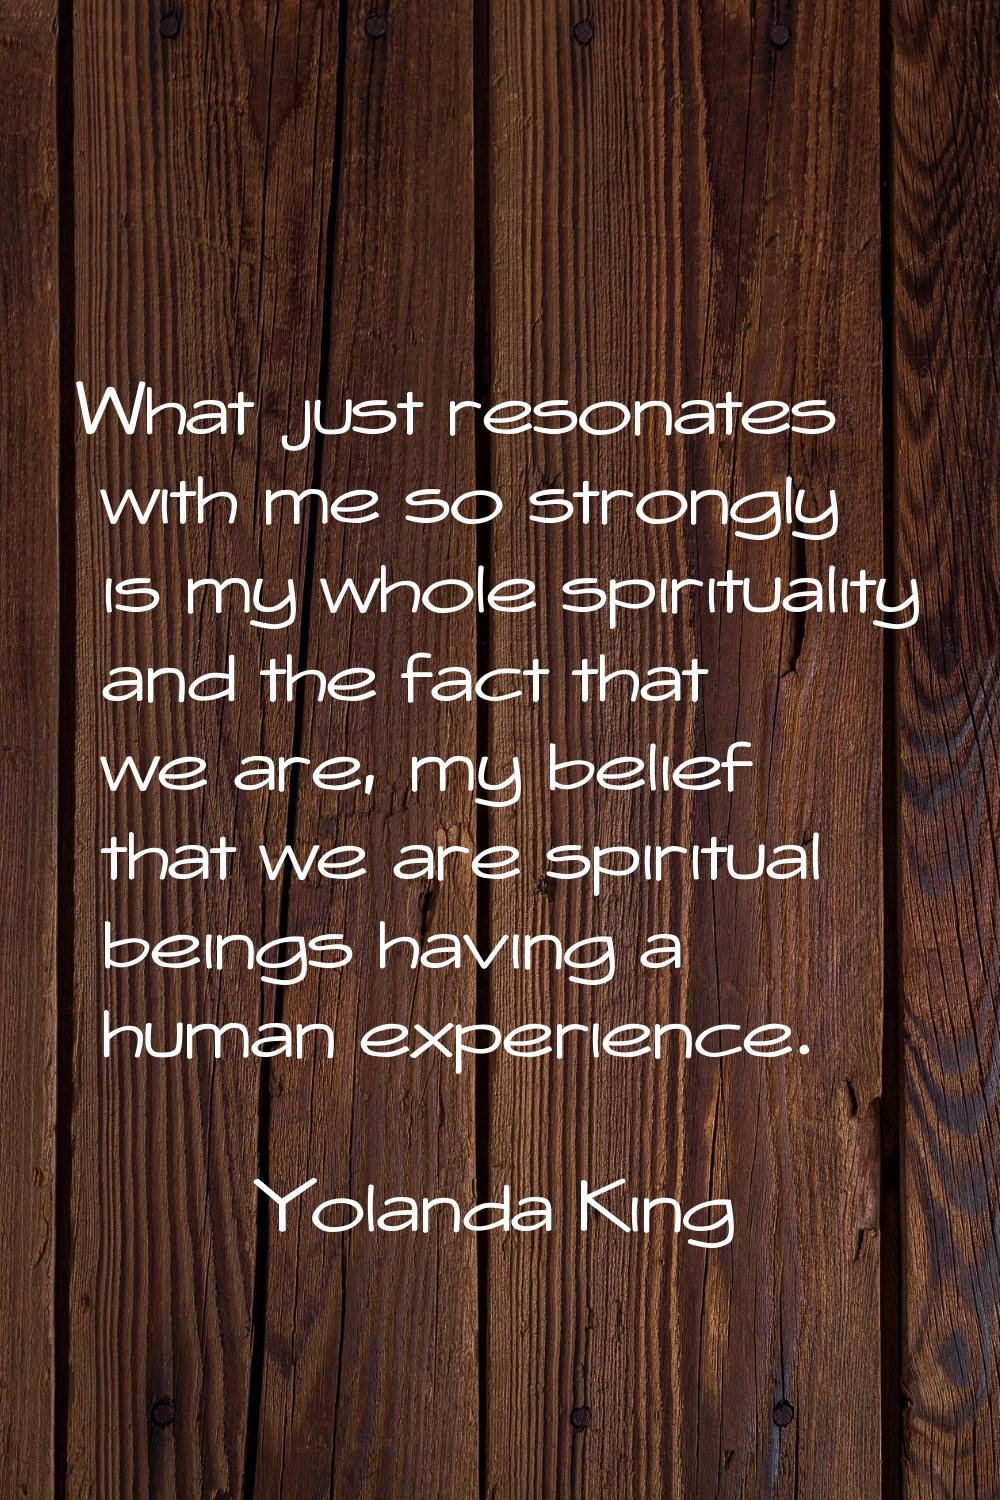 What just resonates with me so strongly is my whole spirituality and the fact that we are, my belie